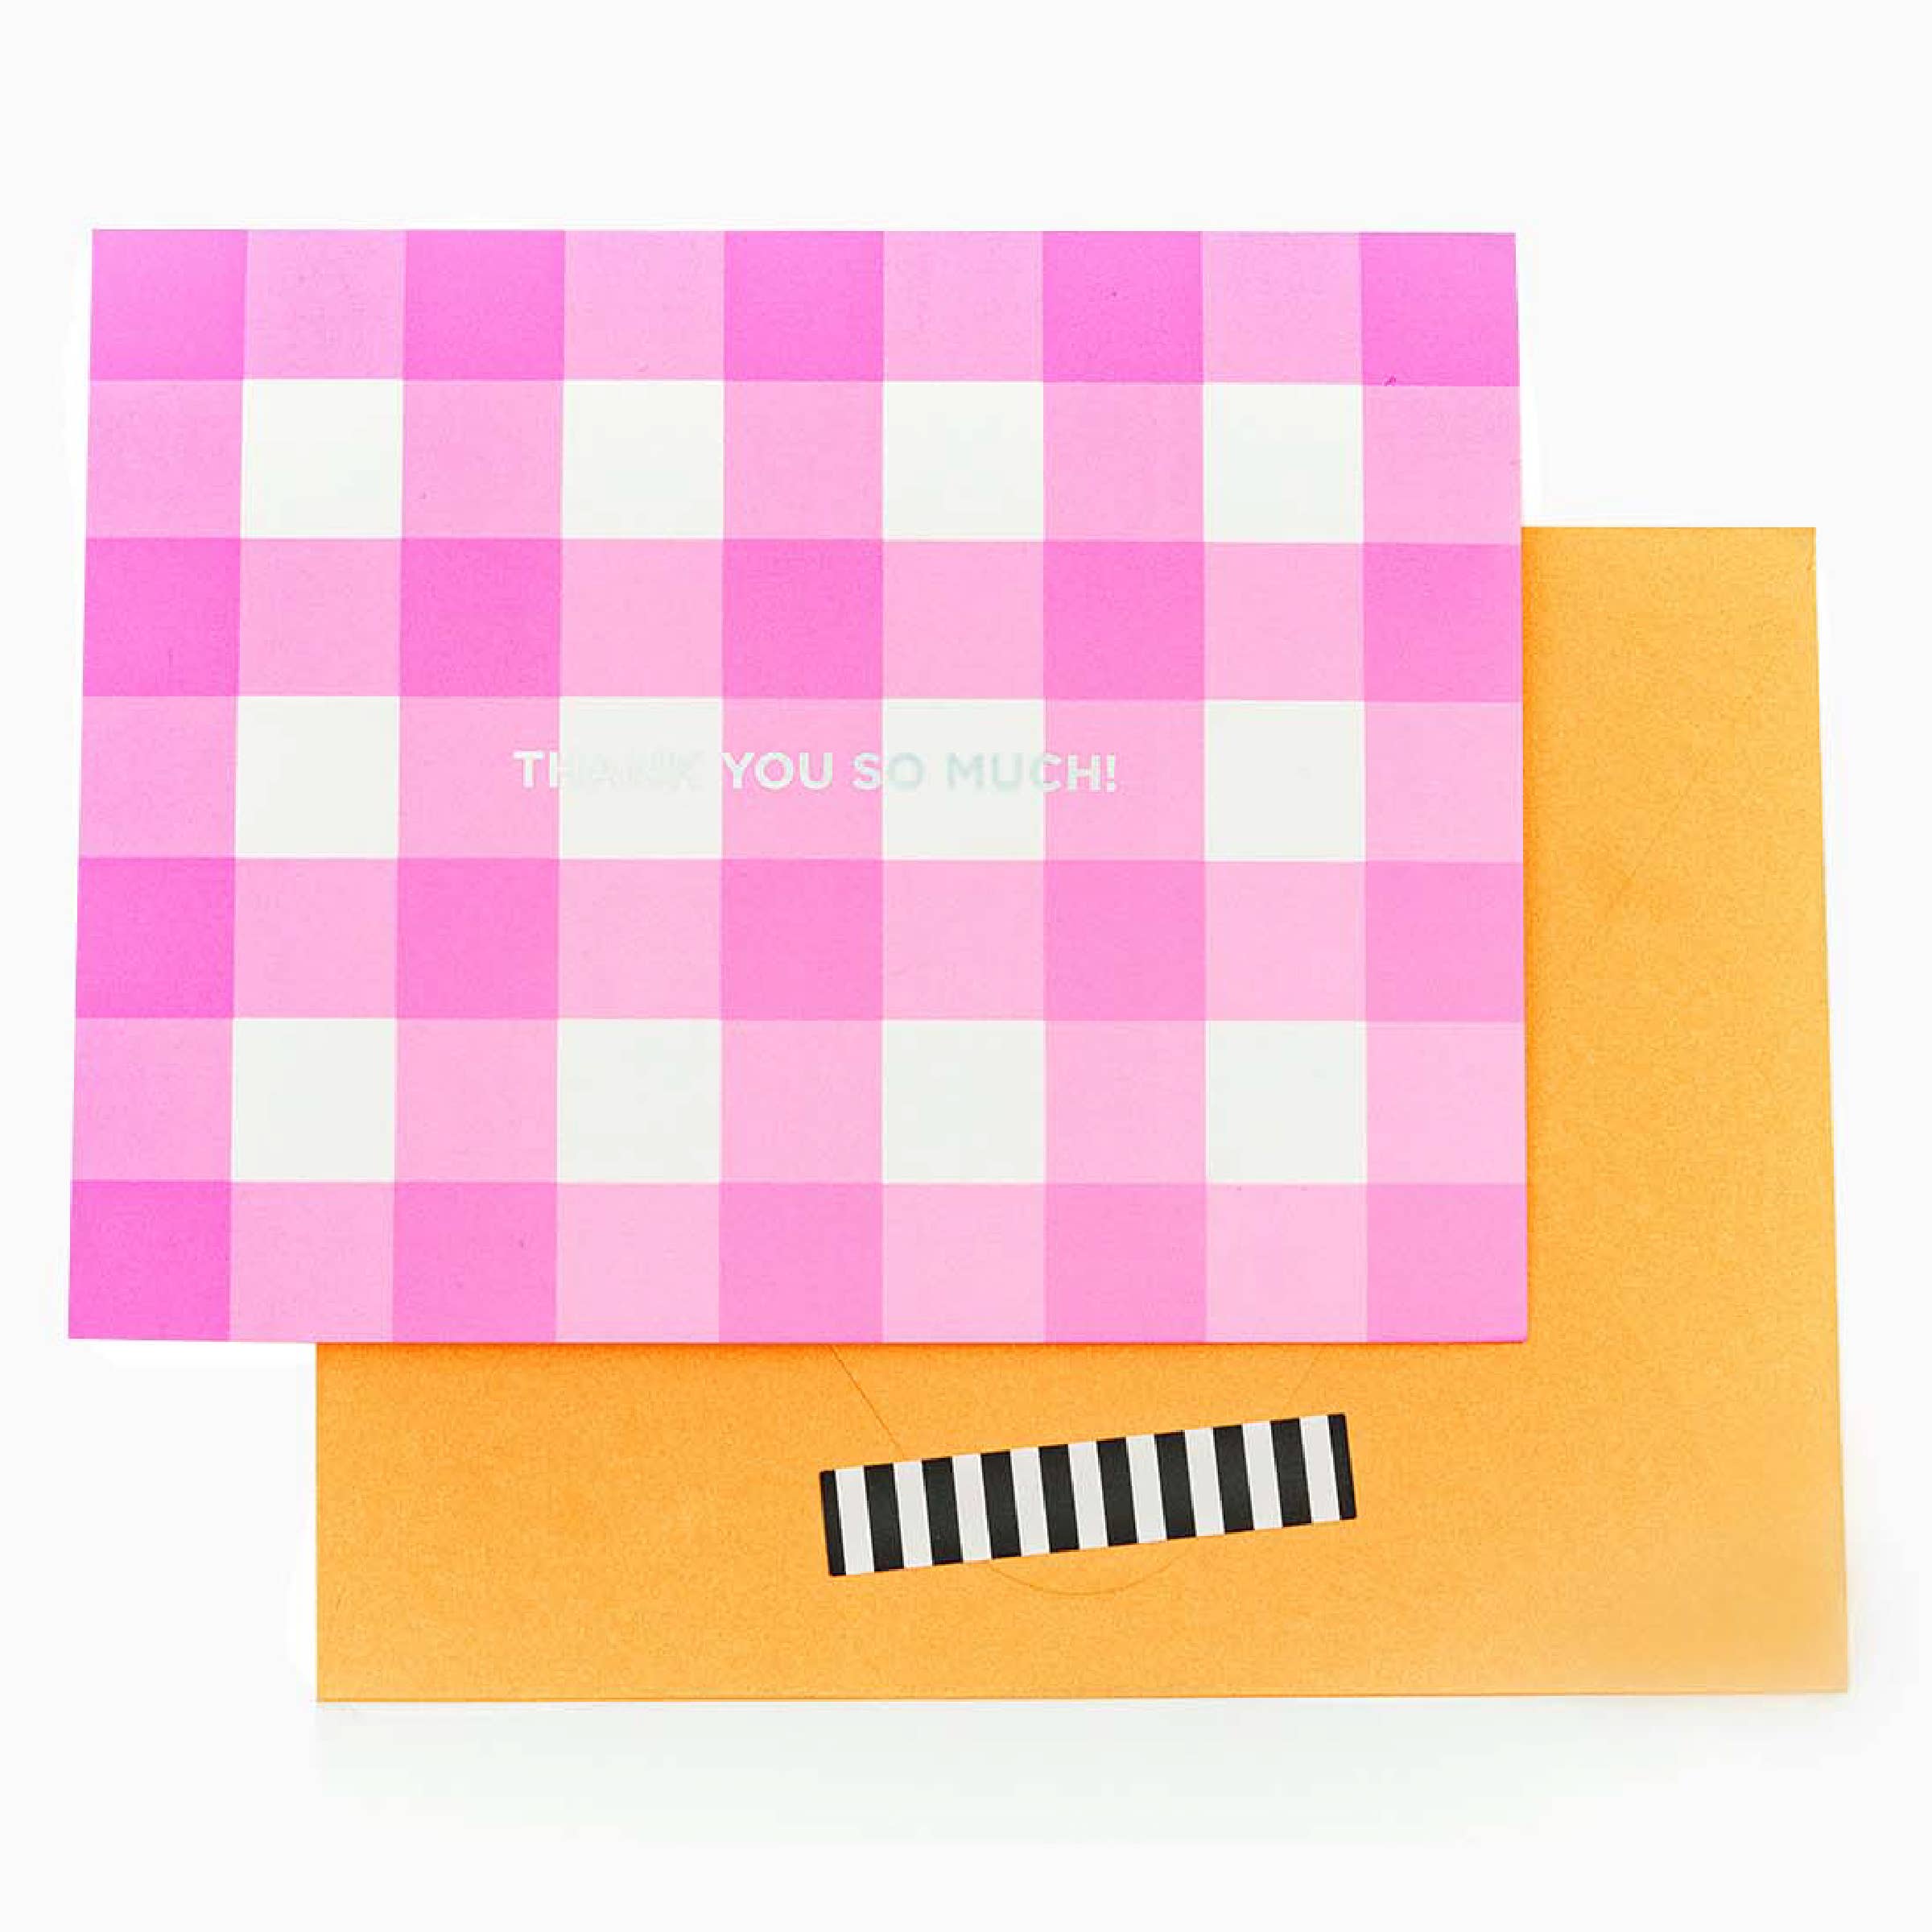 Thank You Boxed Note Cards - Bright, fun notecards